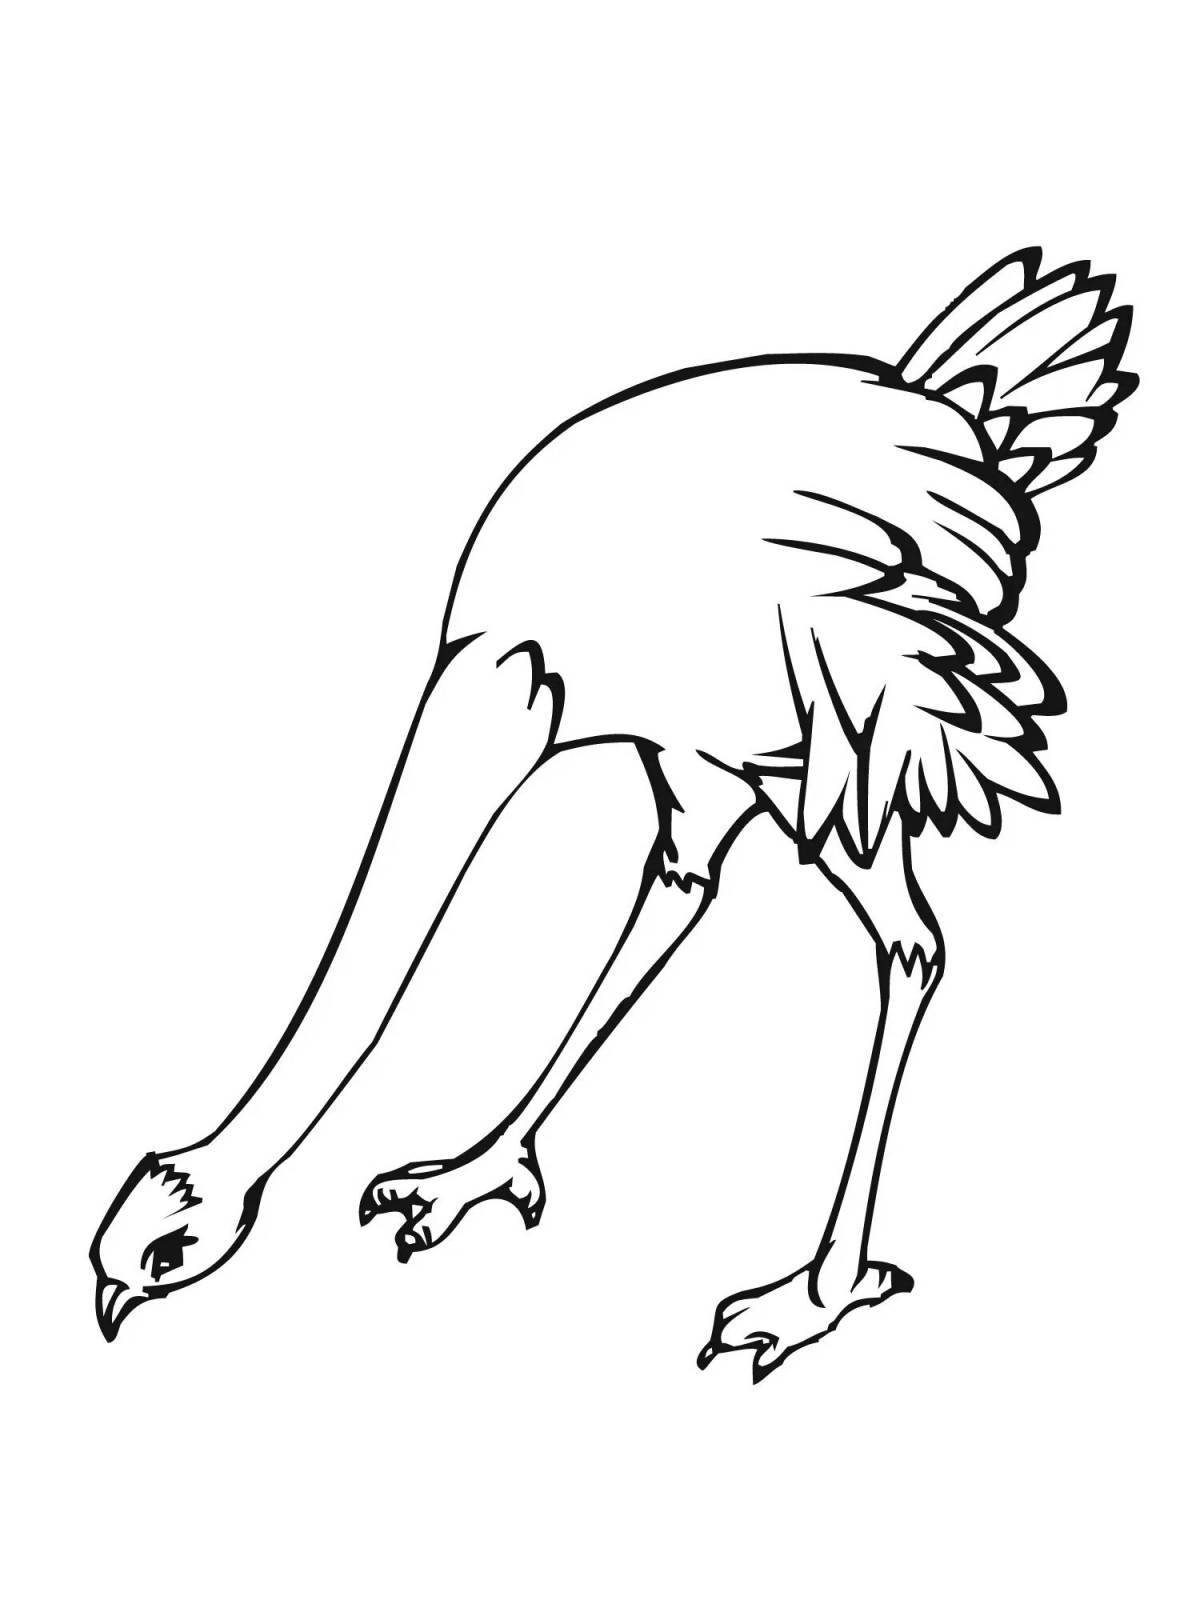 Outstanding ostrich coloring page for kids